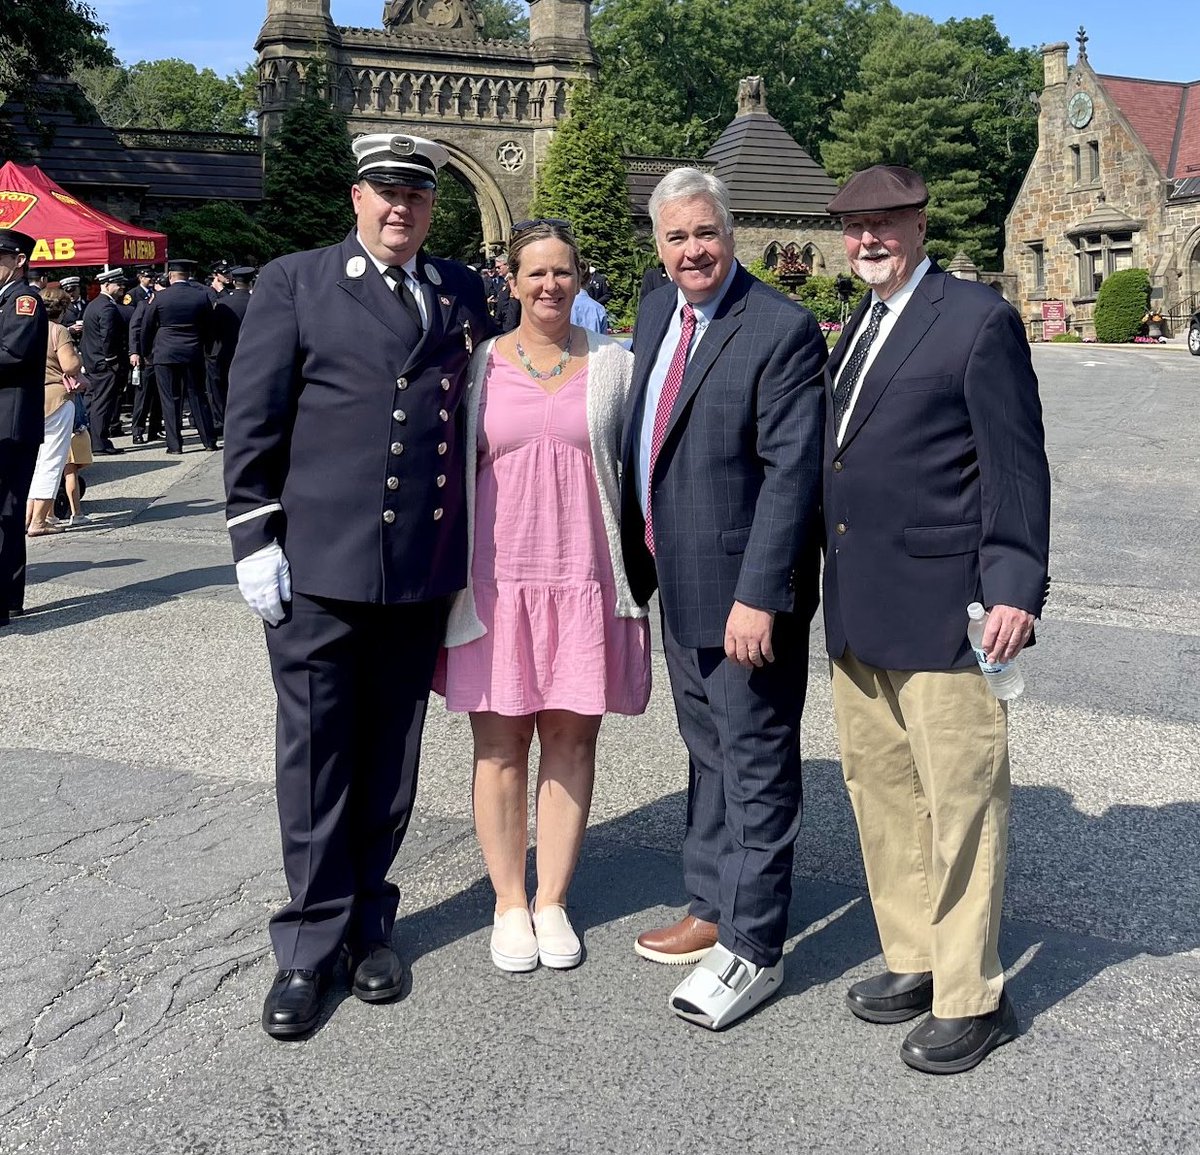 Attending the 130th Firefighters Memorial at Forest Hills Cemetery was an honor. This solemn tribute each year reveres those who have given the ultimate sacrifice. #comingtogether #actionnotjustwords #bospoli #teammurphy